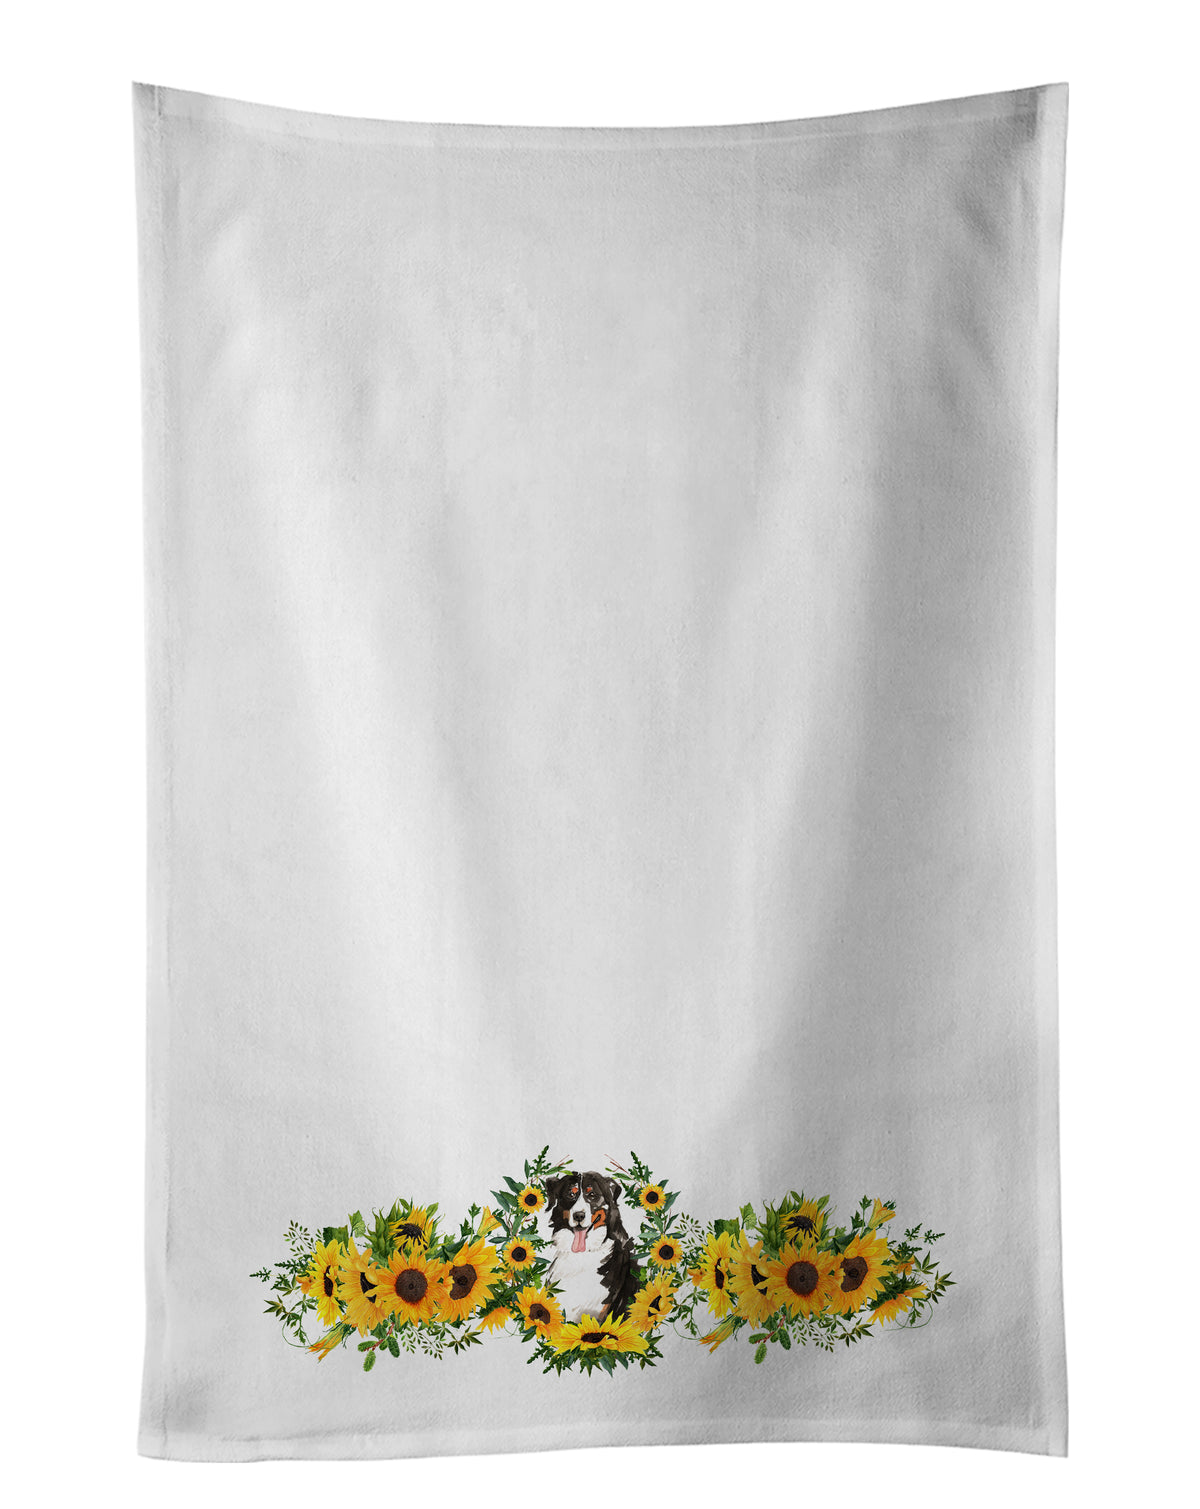 Buy this Bernese Mountain Dog in Sunflowers White Kitchen Towel Set of 2